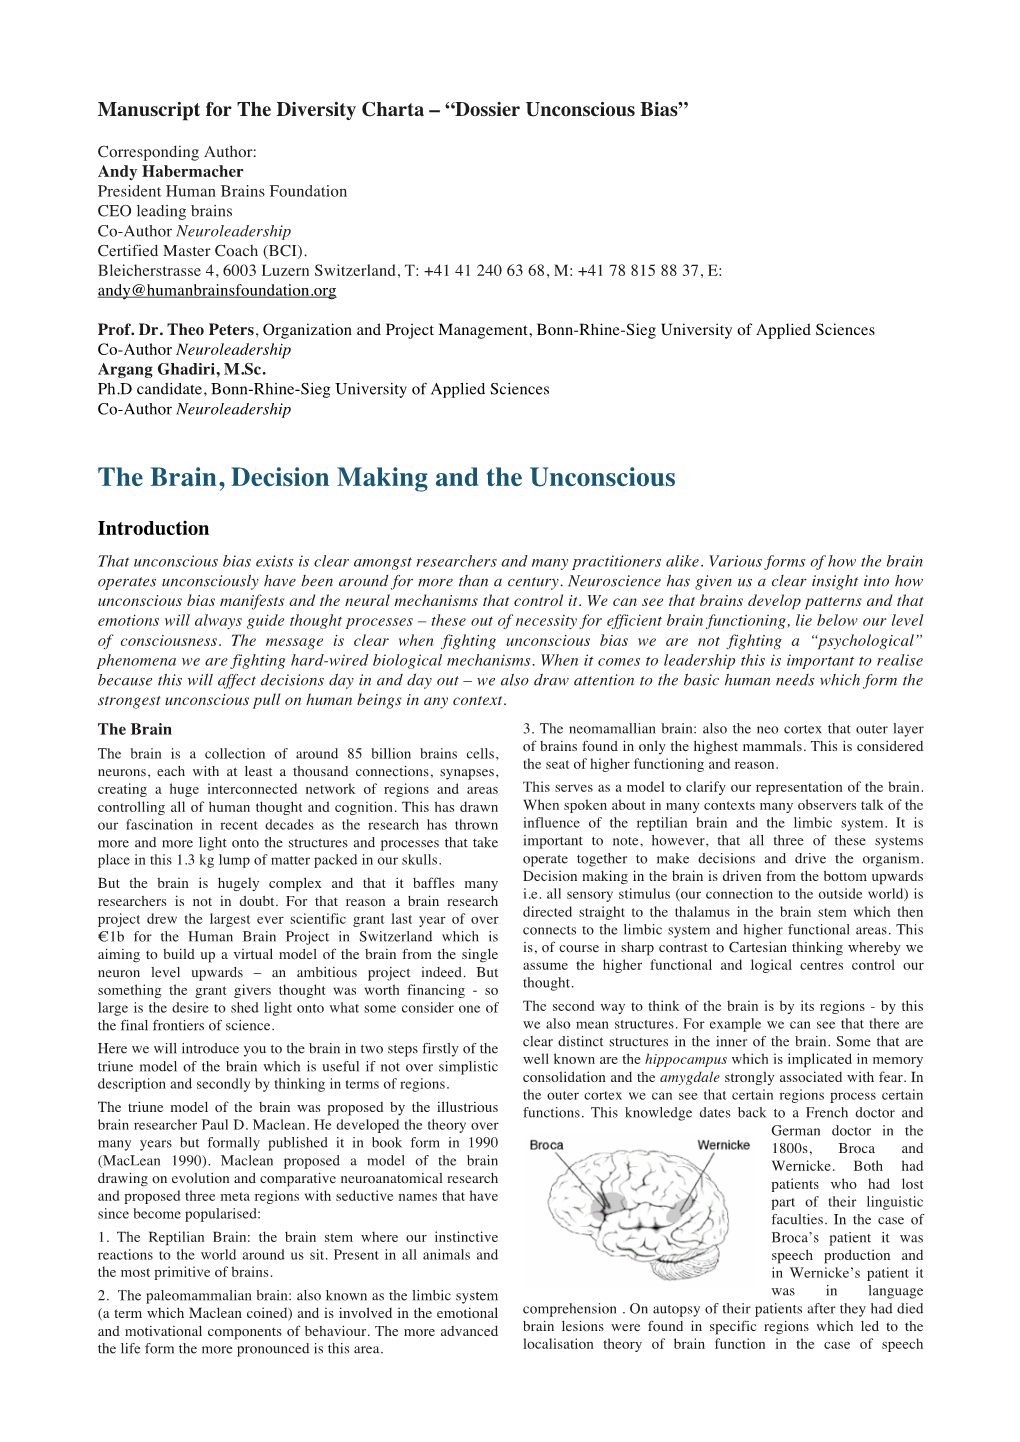 The Brain, Decision Making and the Unconscious